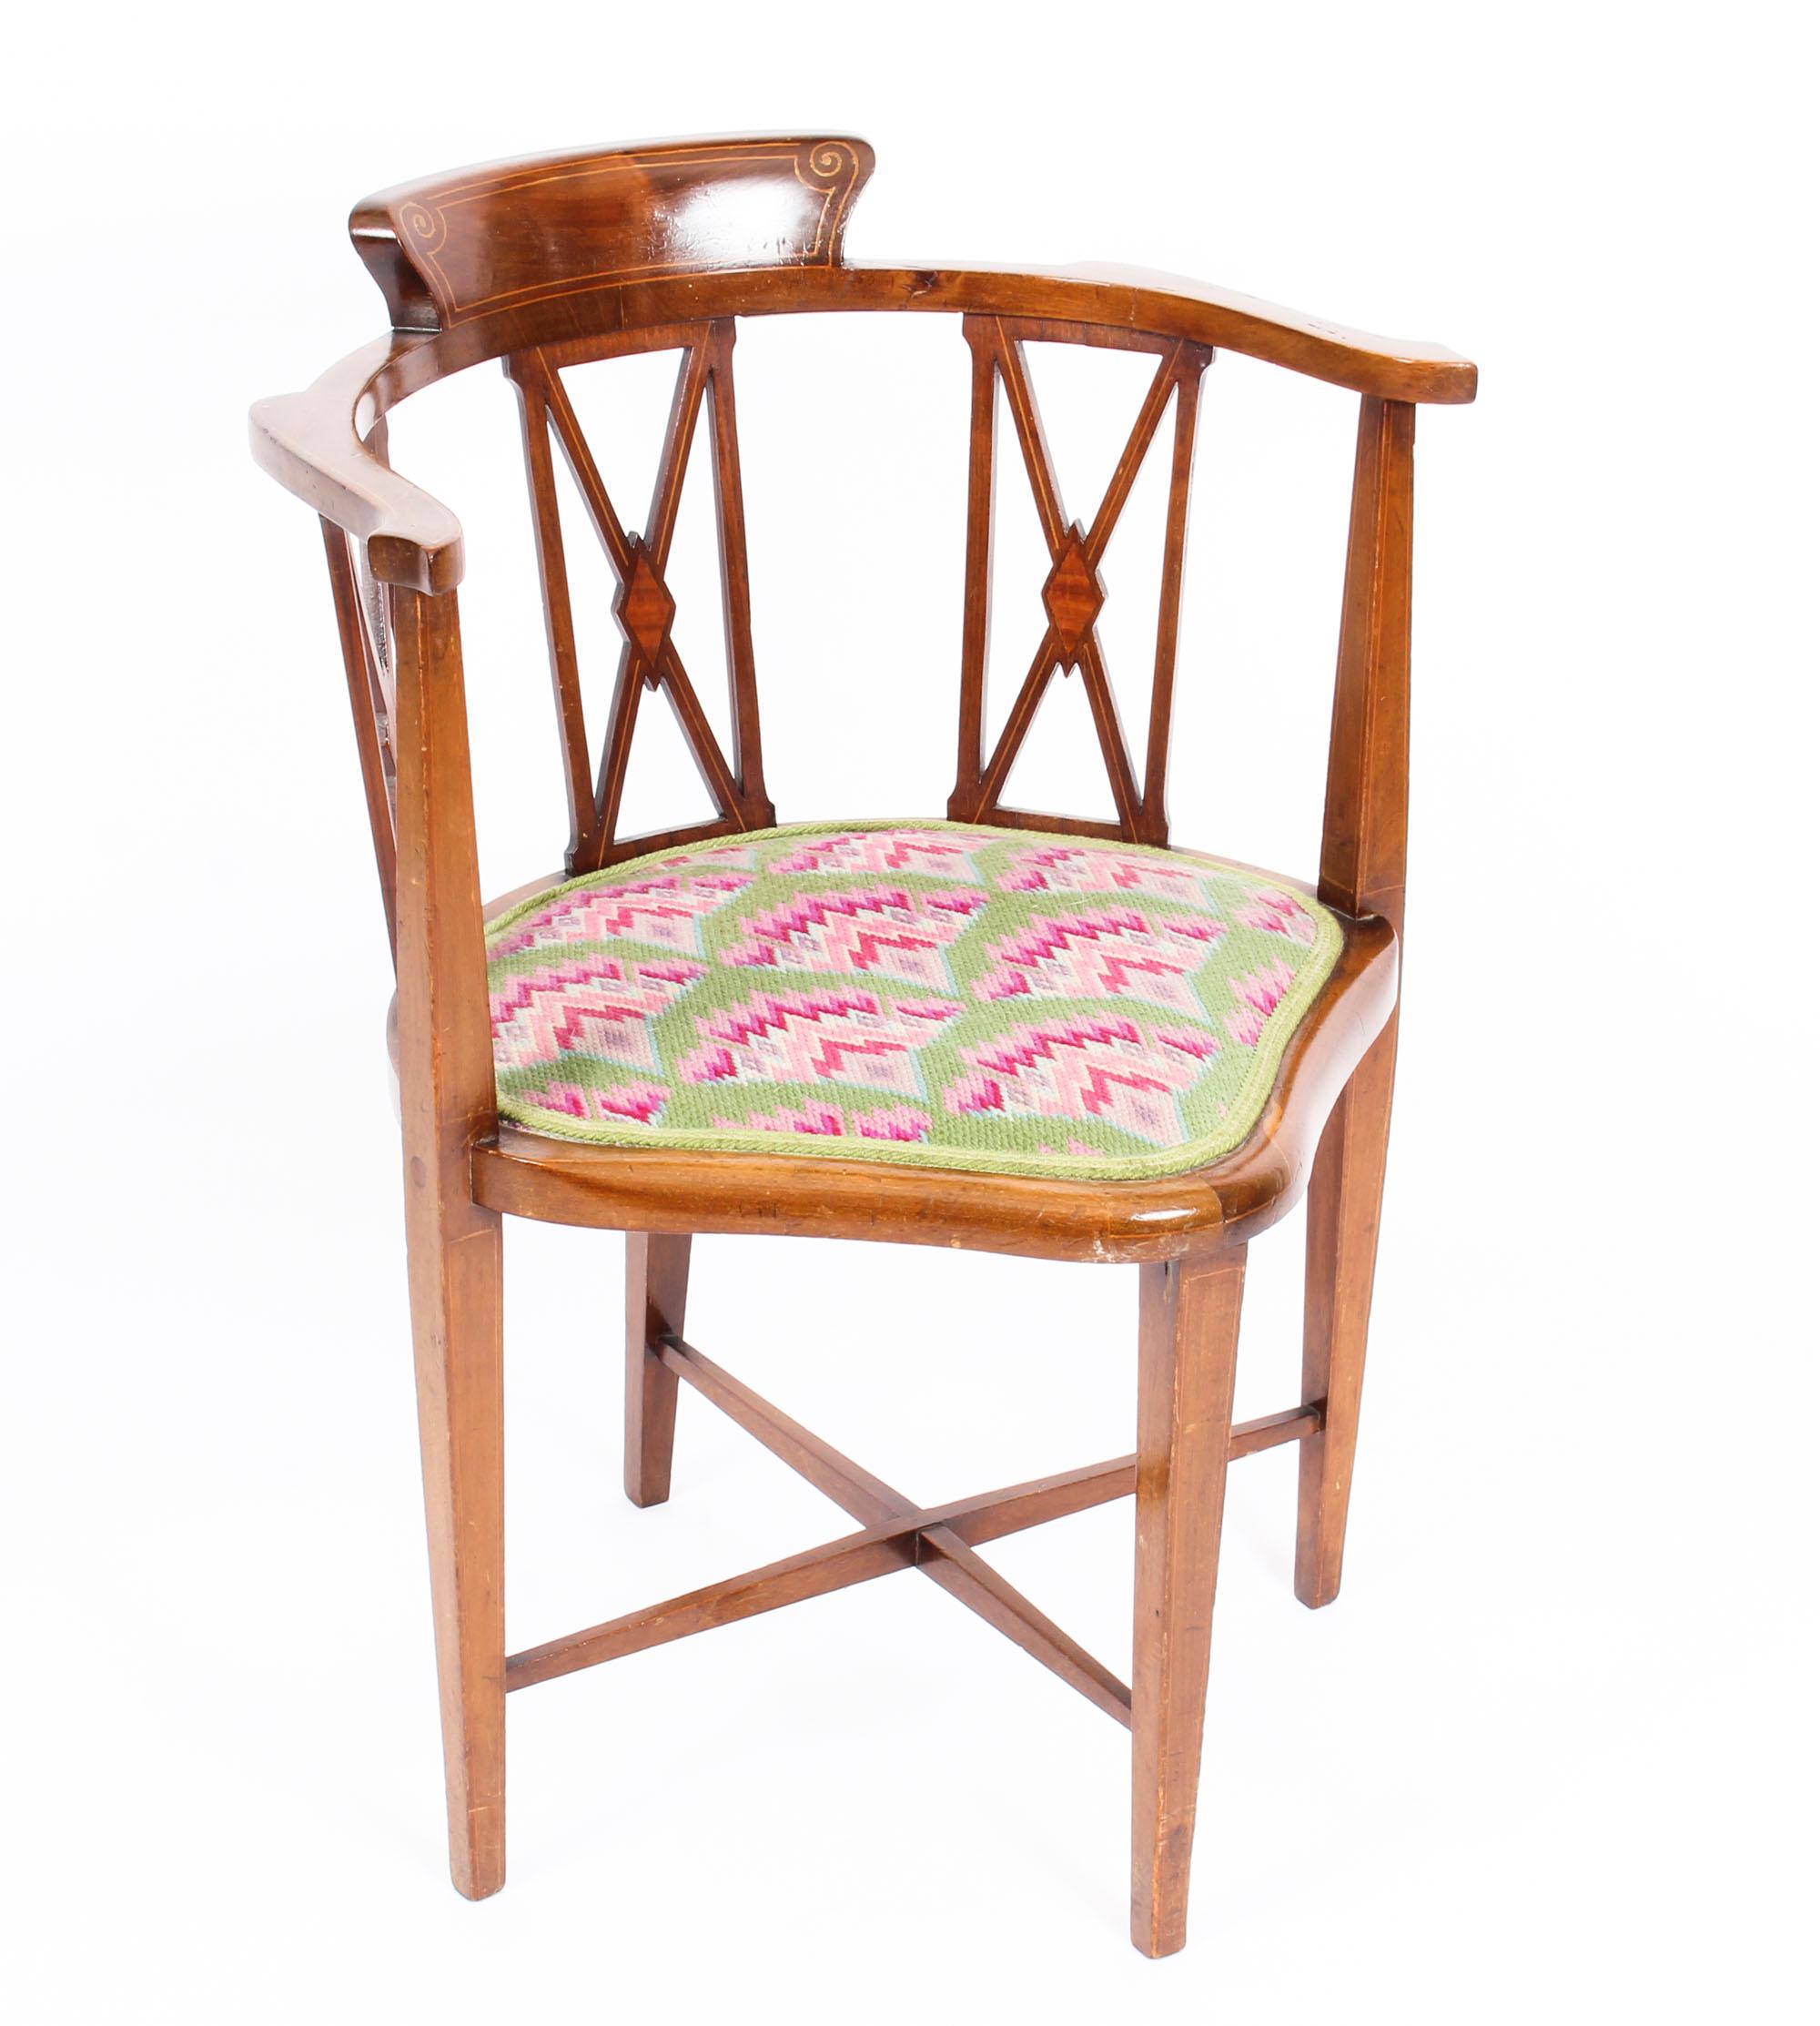 This is a lovely antique Edwardian inlaid mahogany corner arm chair, circa 1900in date.

It has decorative line inlaid decoration and stands on elegant tapering legs united by an h shaped stretcher.

It is a very decorative chair which can be placed